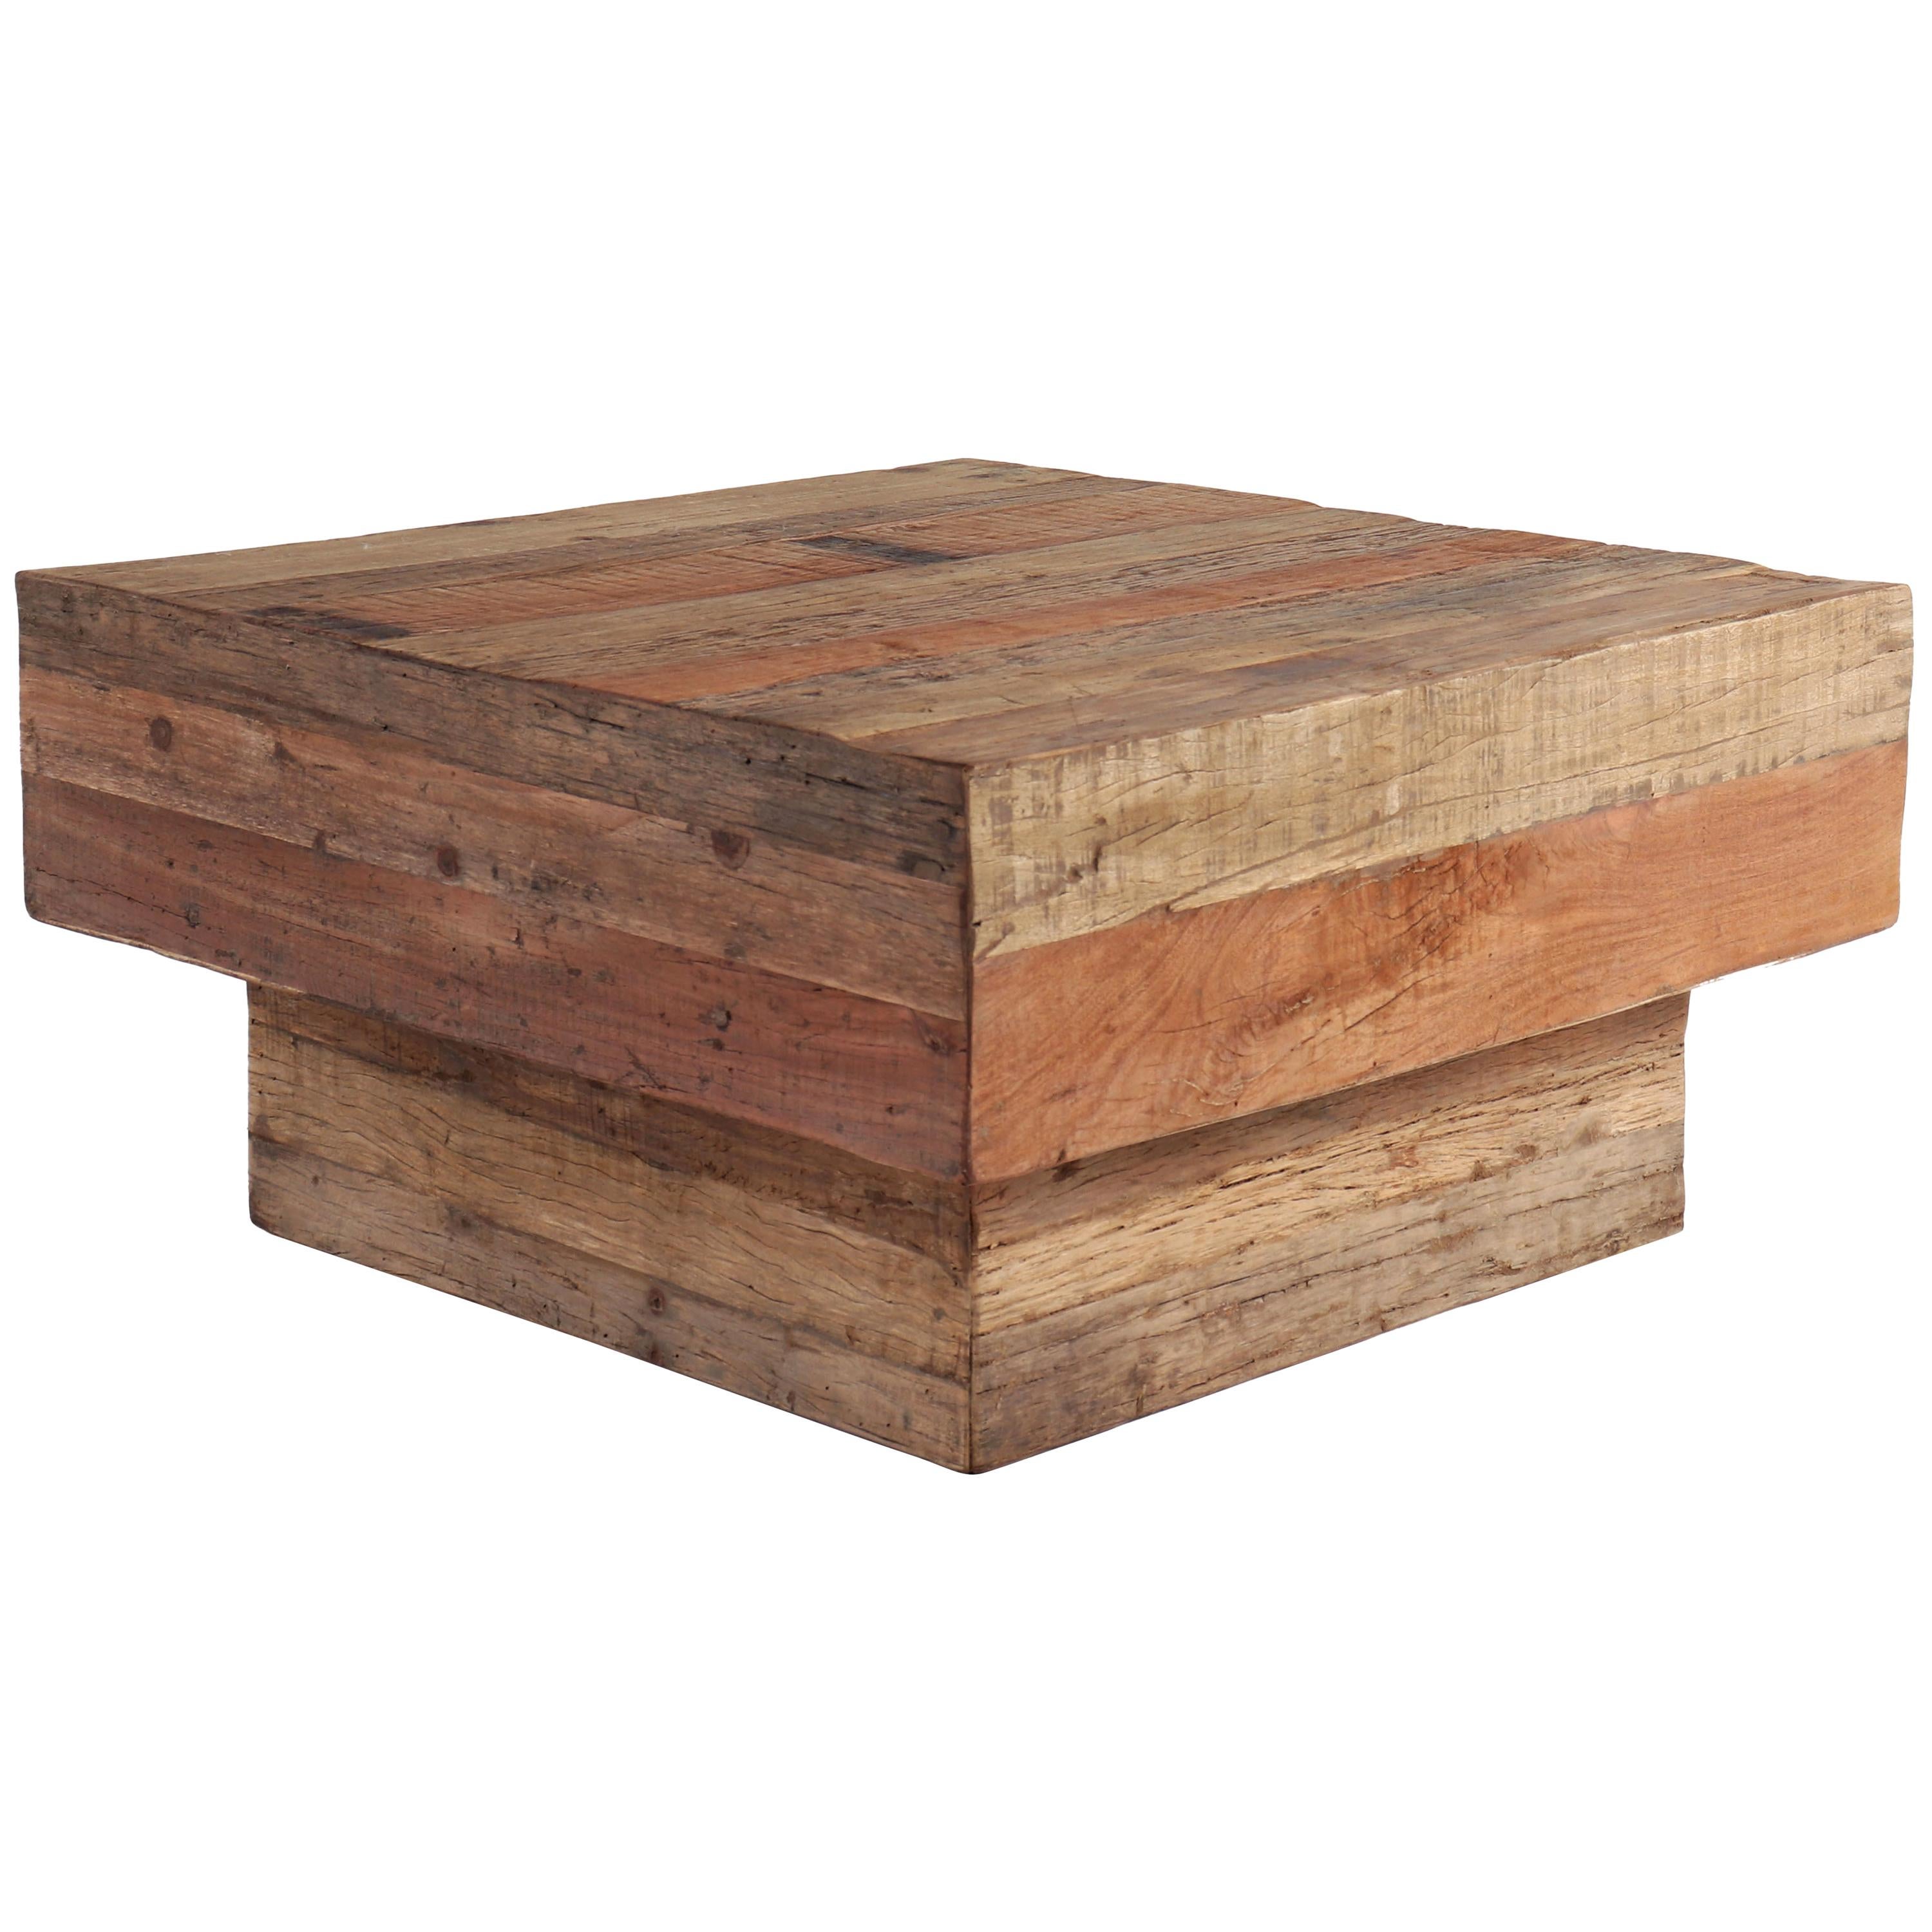 Contemporary Coffee Table Made from Repurposed Teak Planking